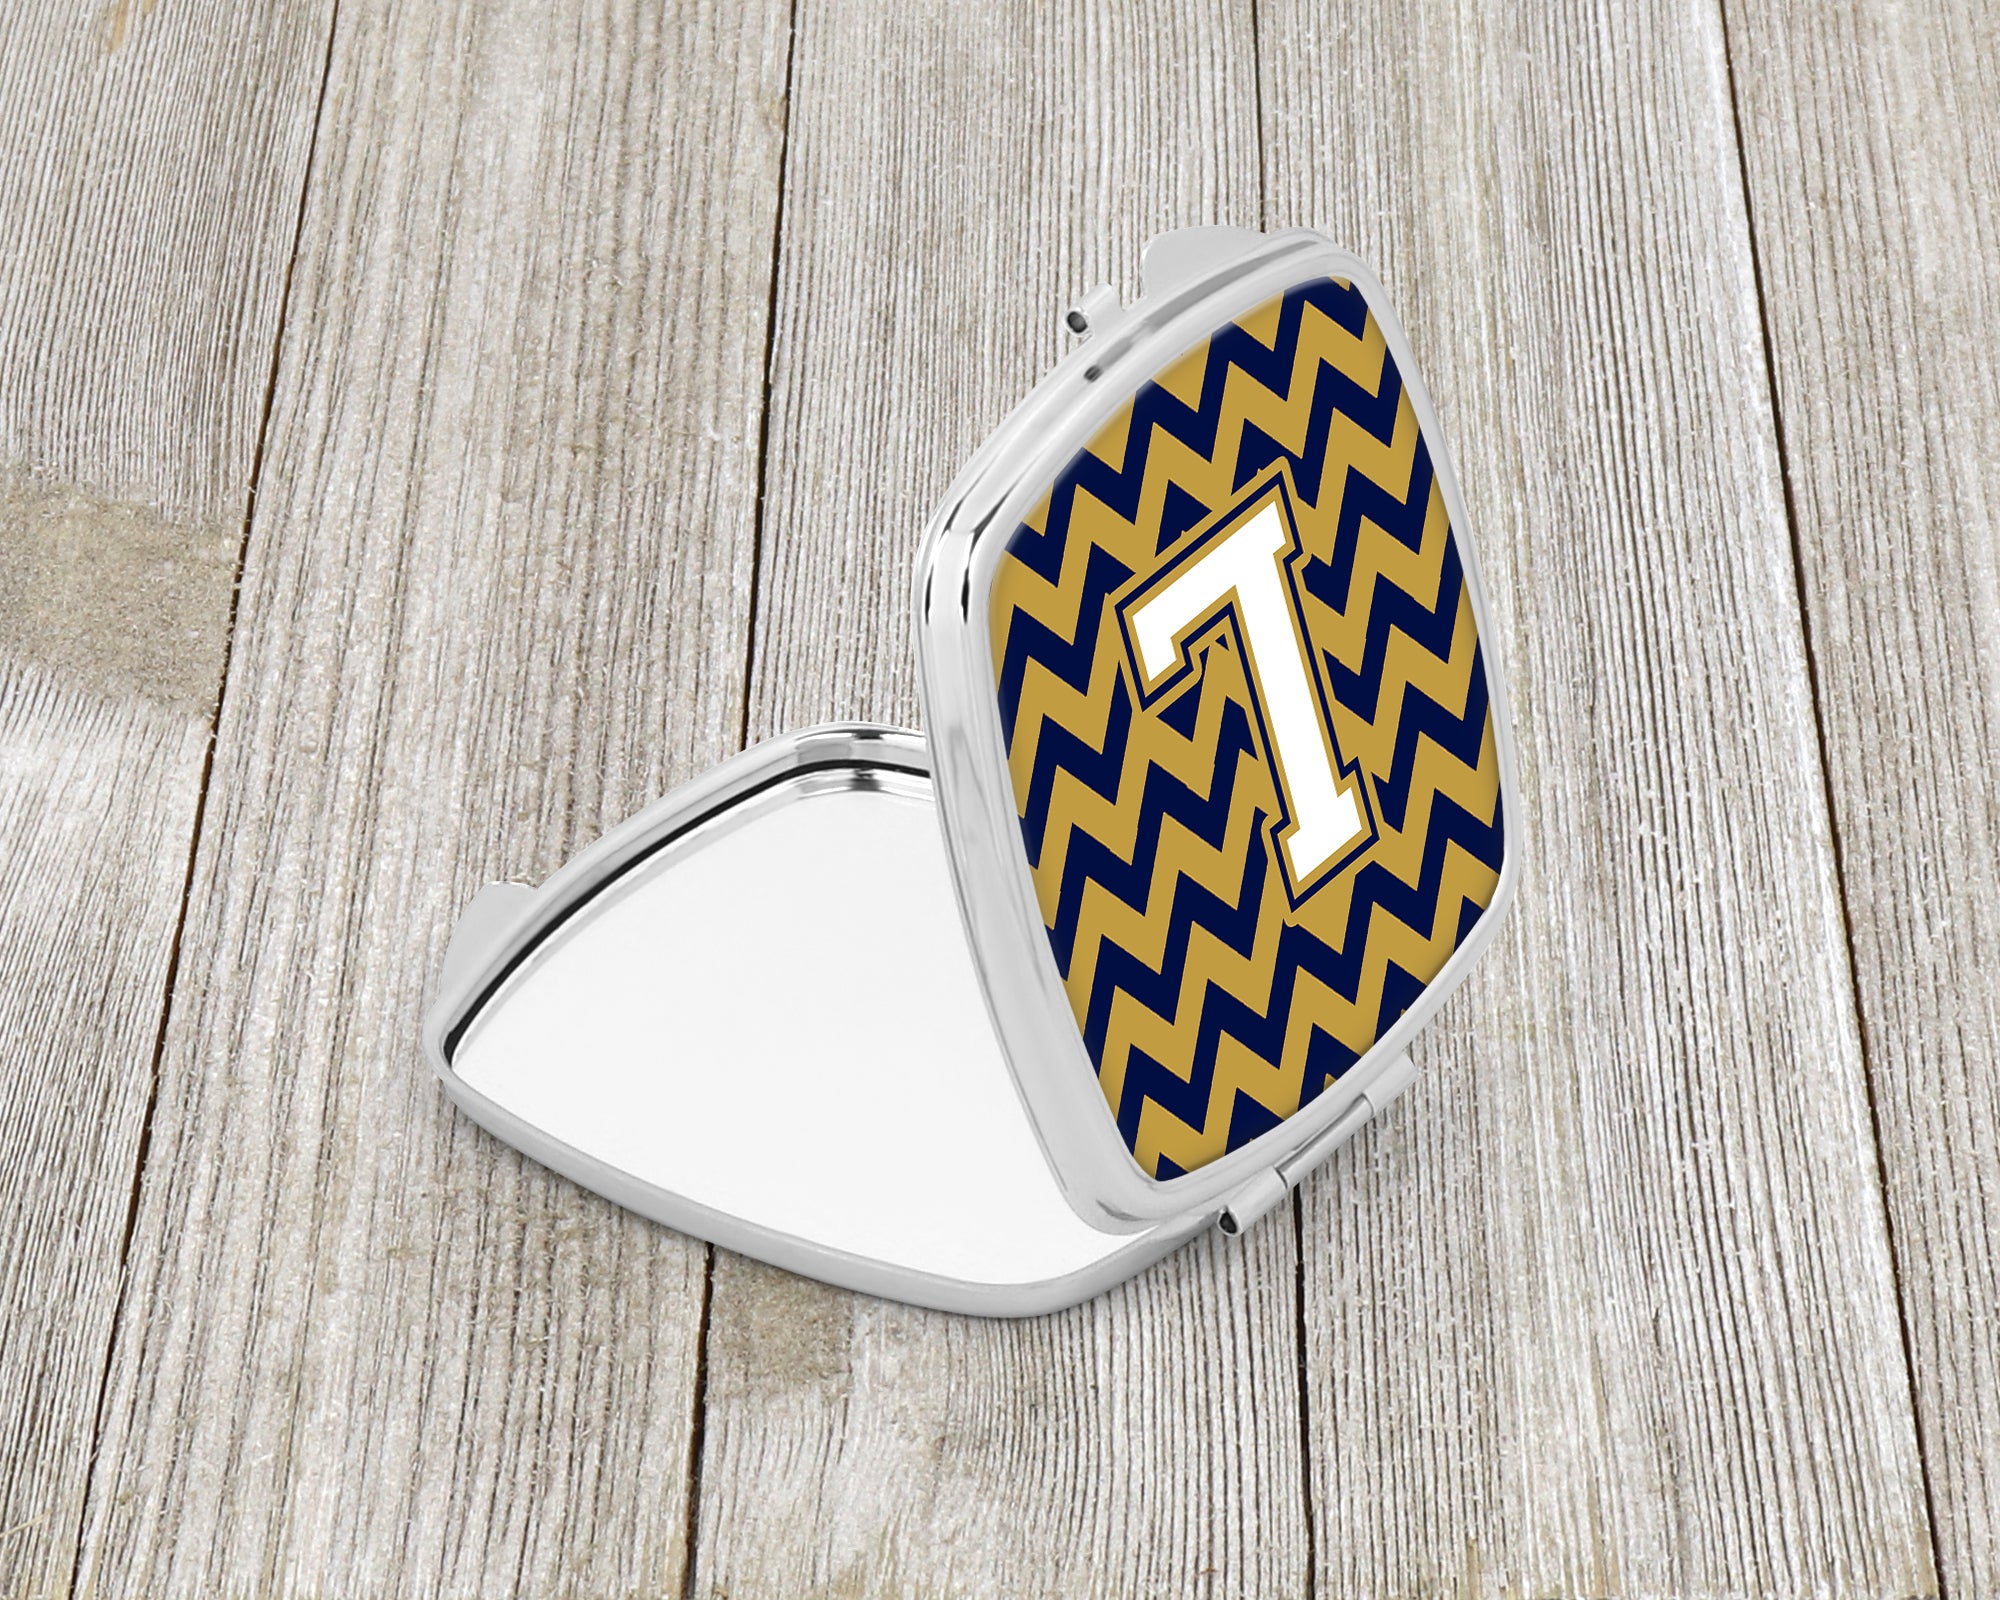 Letter L Chevron Navy Blue and Gold Compact Mirror CJ1057-LSCM